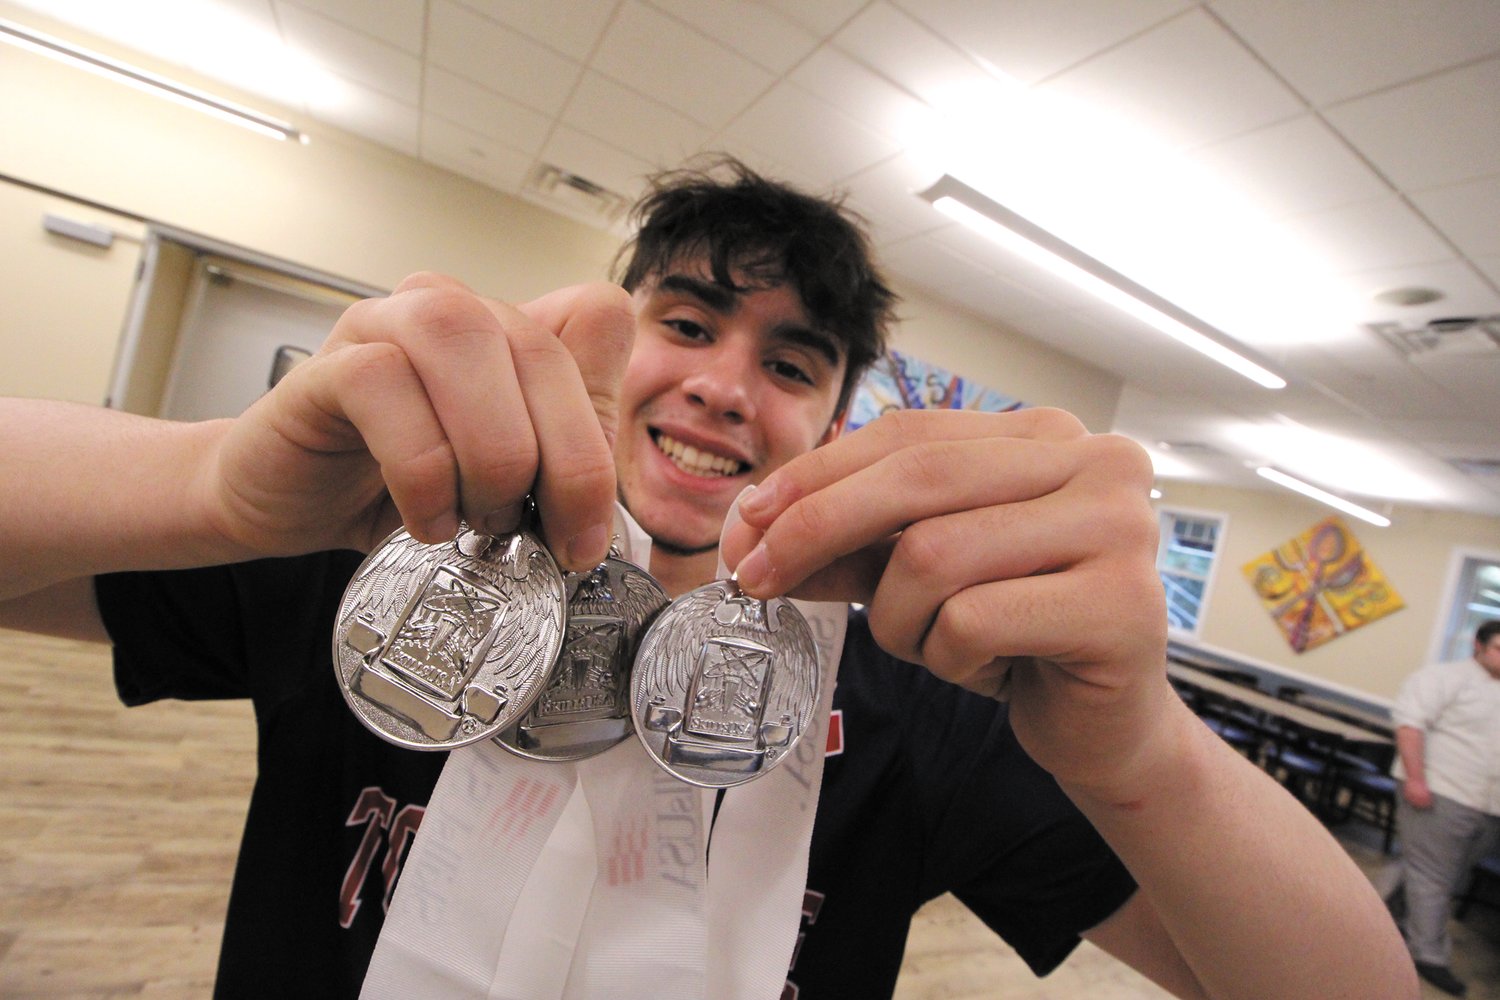 TRIFECTA: Christopher Pires displays the three silver medals he has won over the past three years in the Skills USA internetworking competition. He plans to attend Bryant University where he has been awarded a $27,000 scholarship for four years.